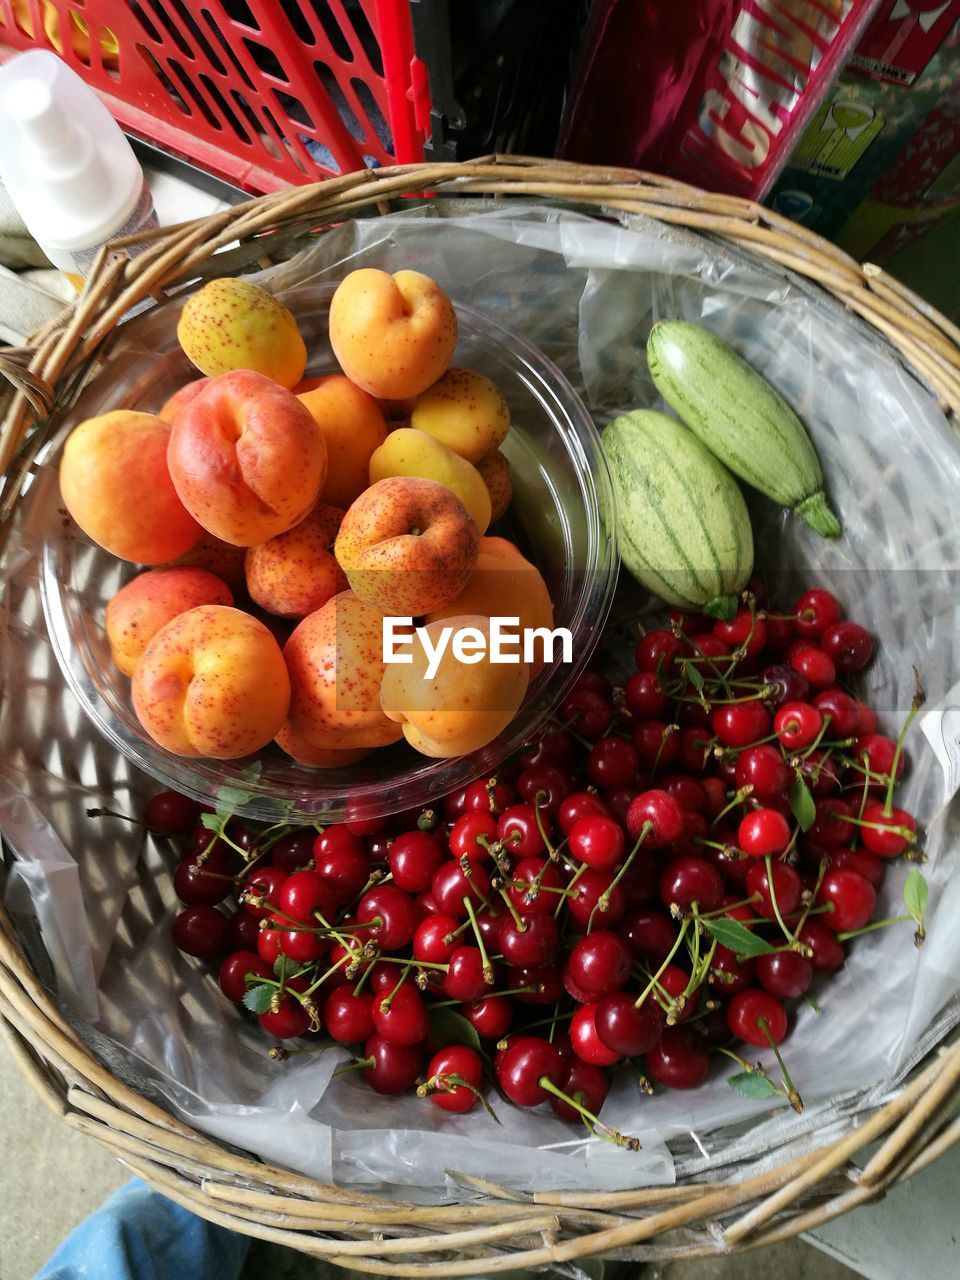 CLOSE-UP OF FRUITS IN BASKET IN PLATE